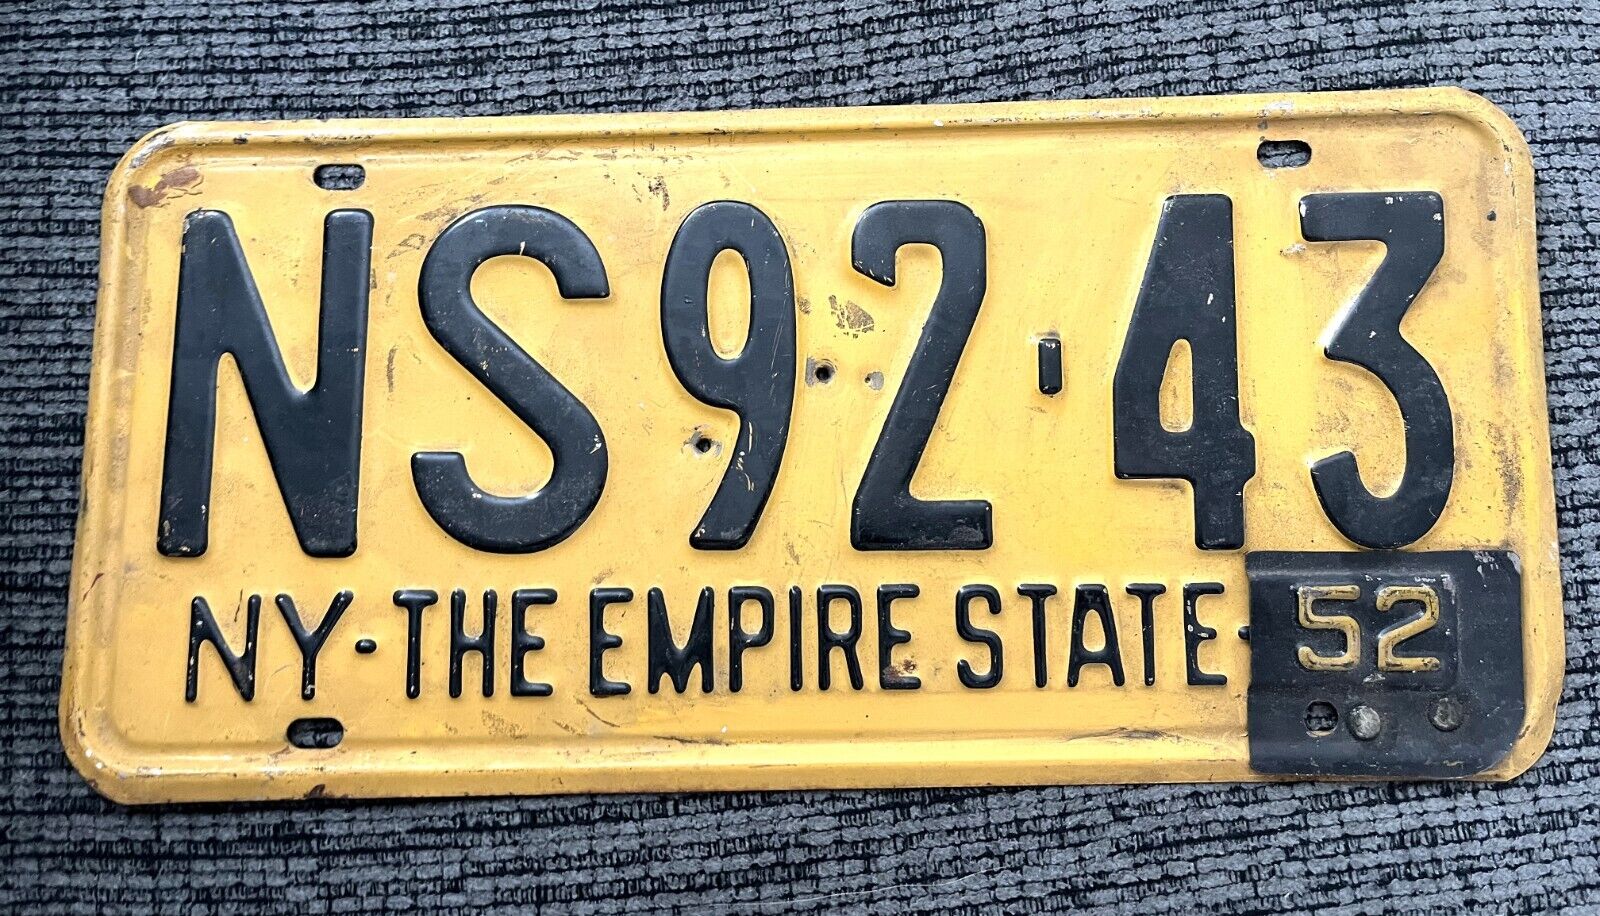 NEW YORK NY The Empire State 1951 52 Single Passenger License Plate Car NS92 43